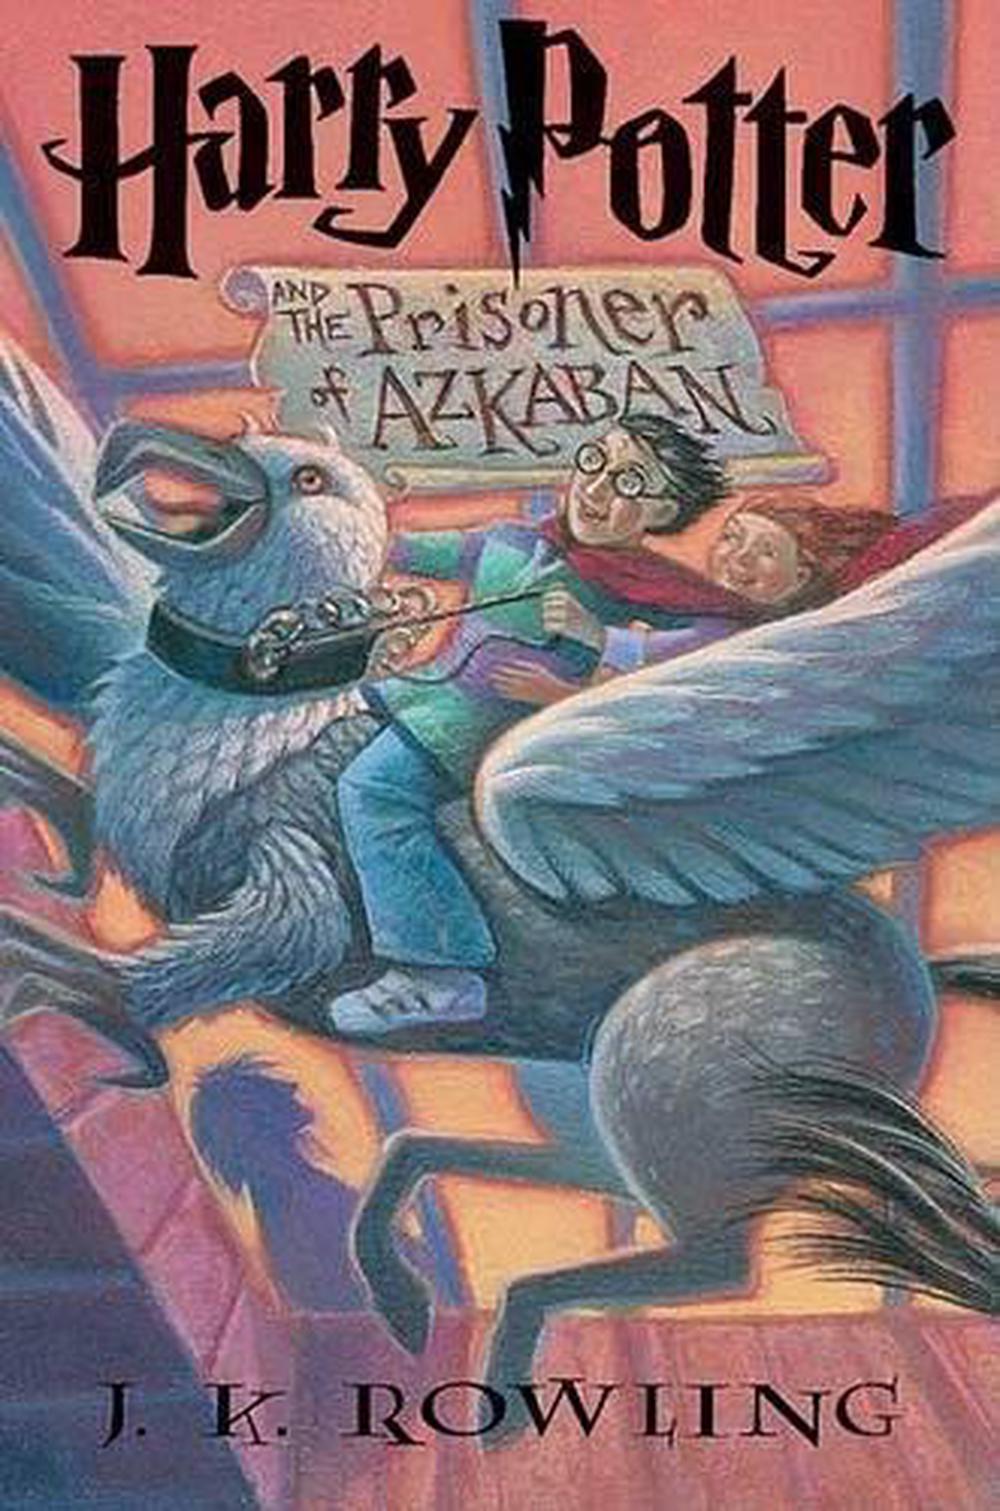 Harry Potter and the Prisoner of Azkaban by J.K. Rowling (English) Paperback Boo 9780439136365